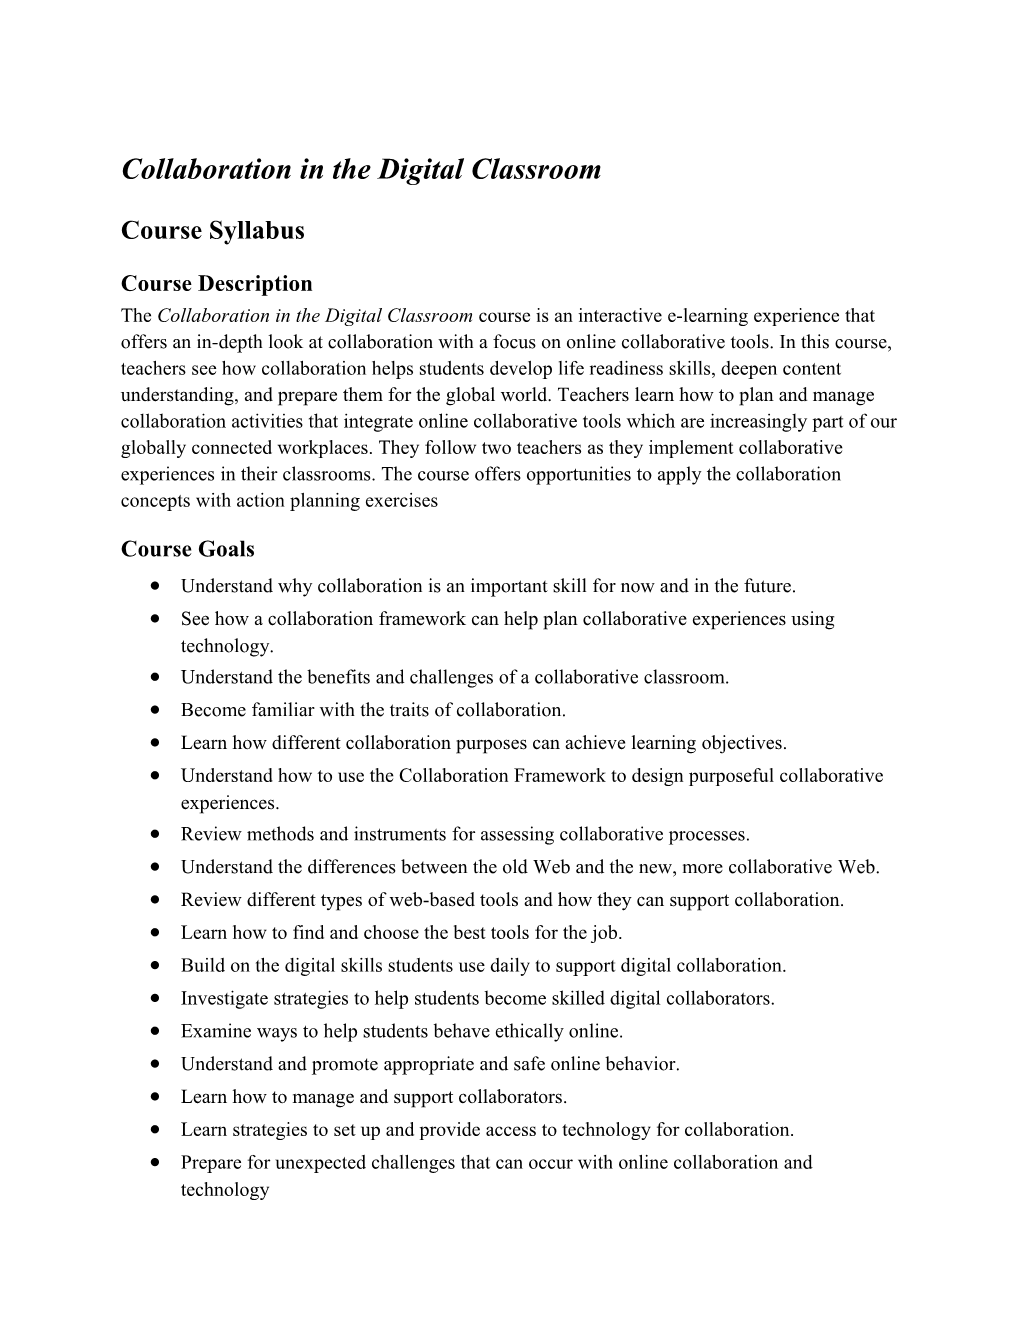 Syllabus for Collaboration in the Digital Classroom